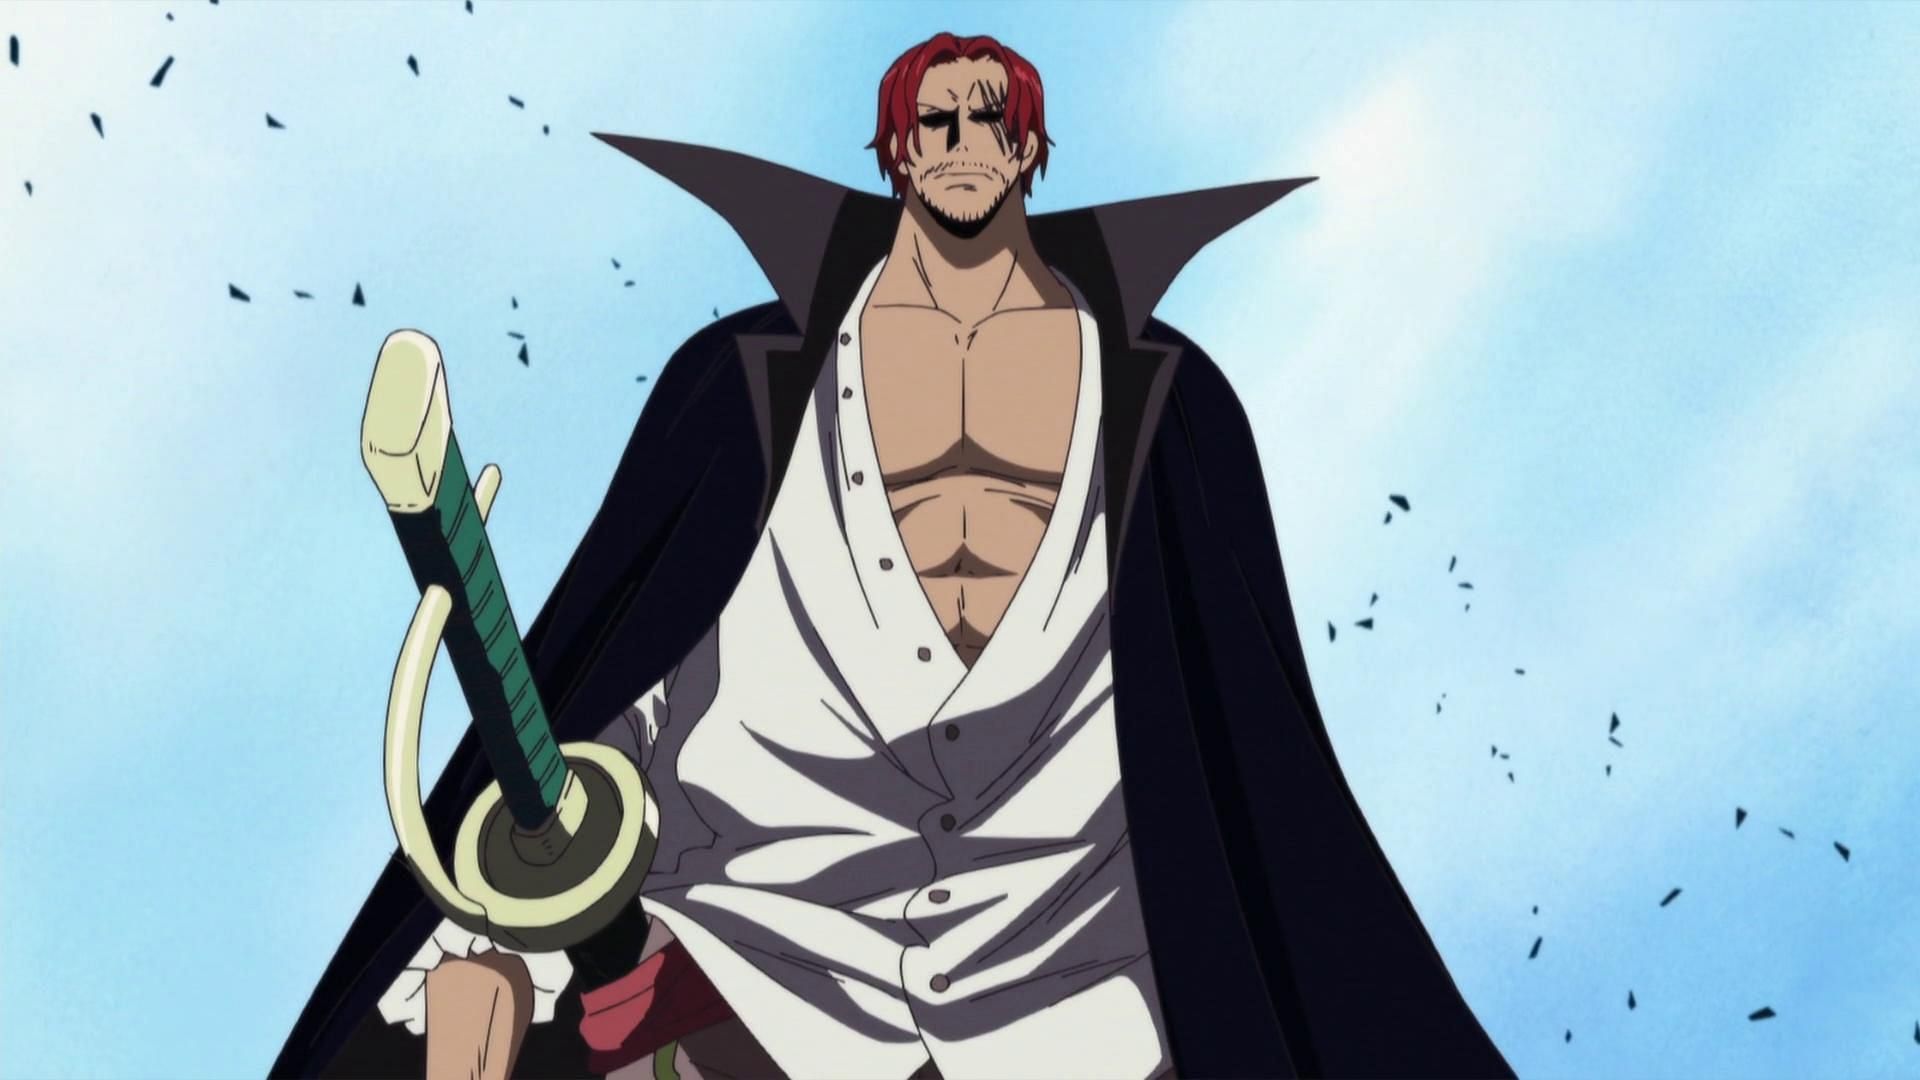 &quot;Red Hair&quot; Shanks as seen in One Piece (Image via Toei Animation, One Piece)